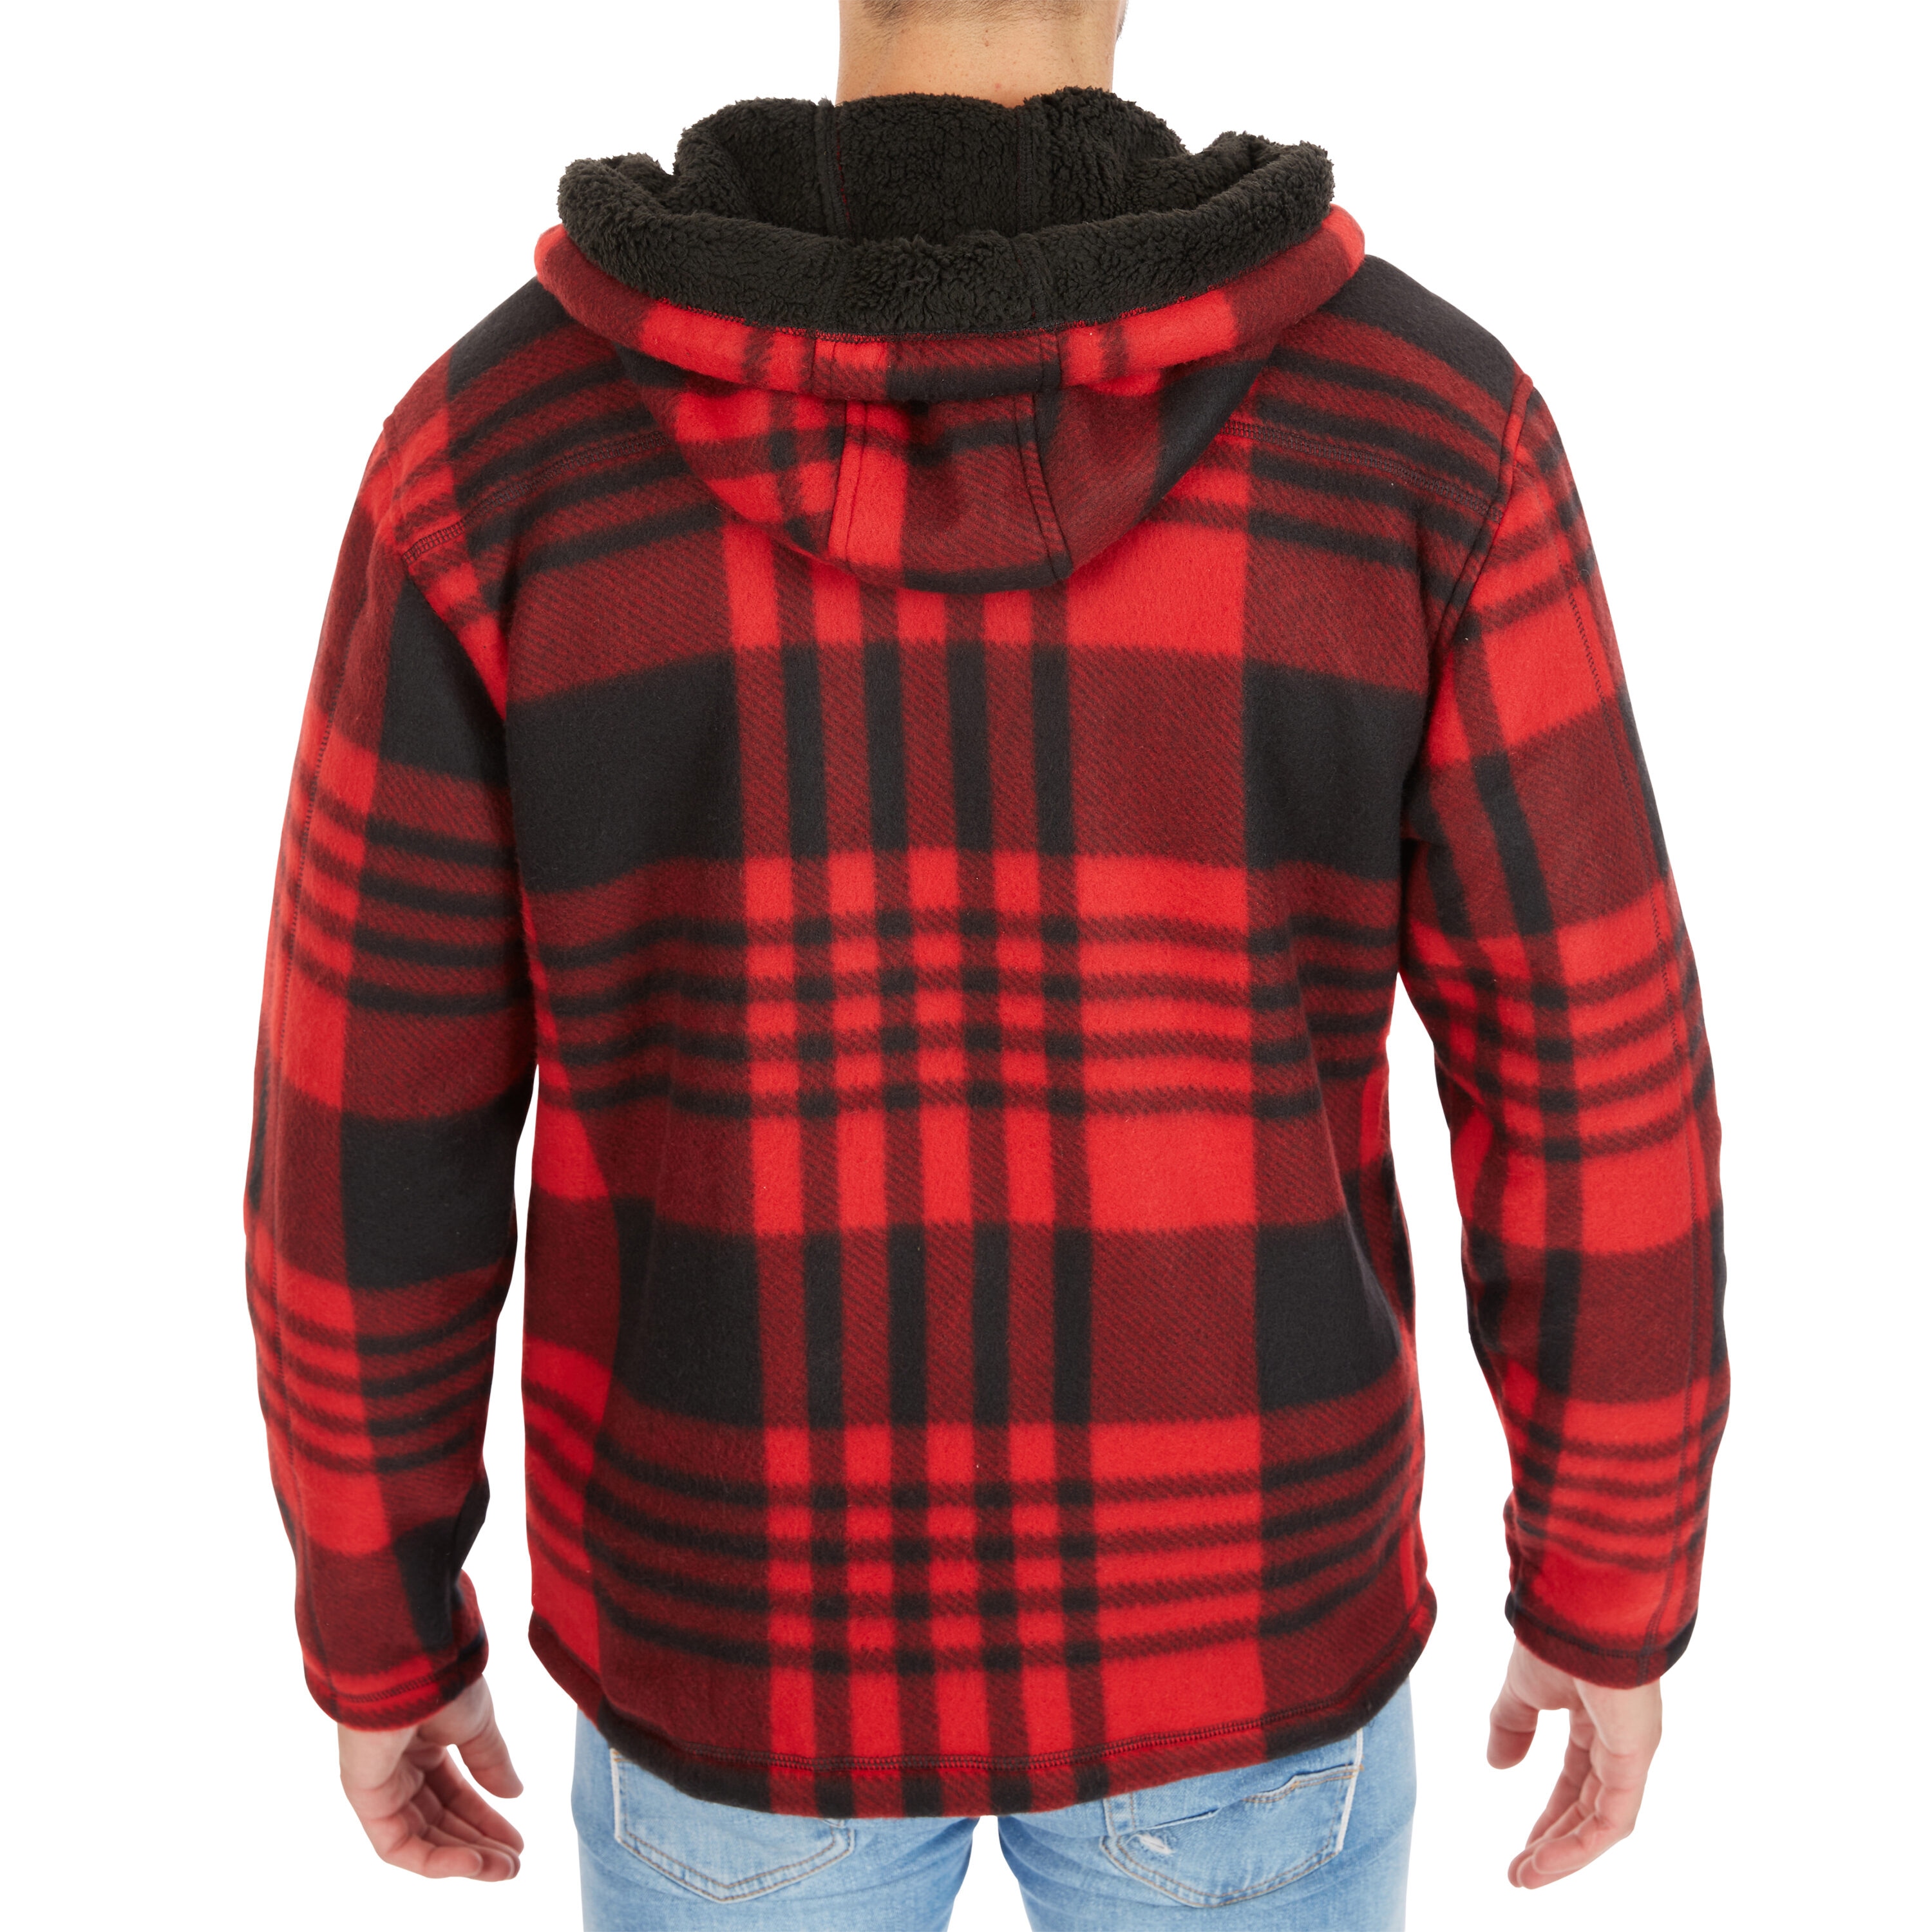 Zip Jacket Coats & at Full Work Fleece Butter-Sherpa in Smith\'s department Jackets the Polar Workwear Plaid Lined Hooded